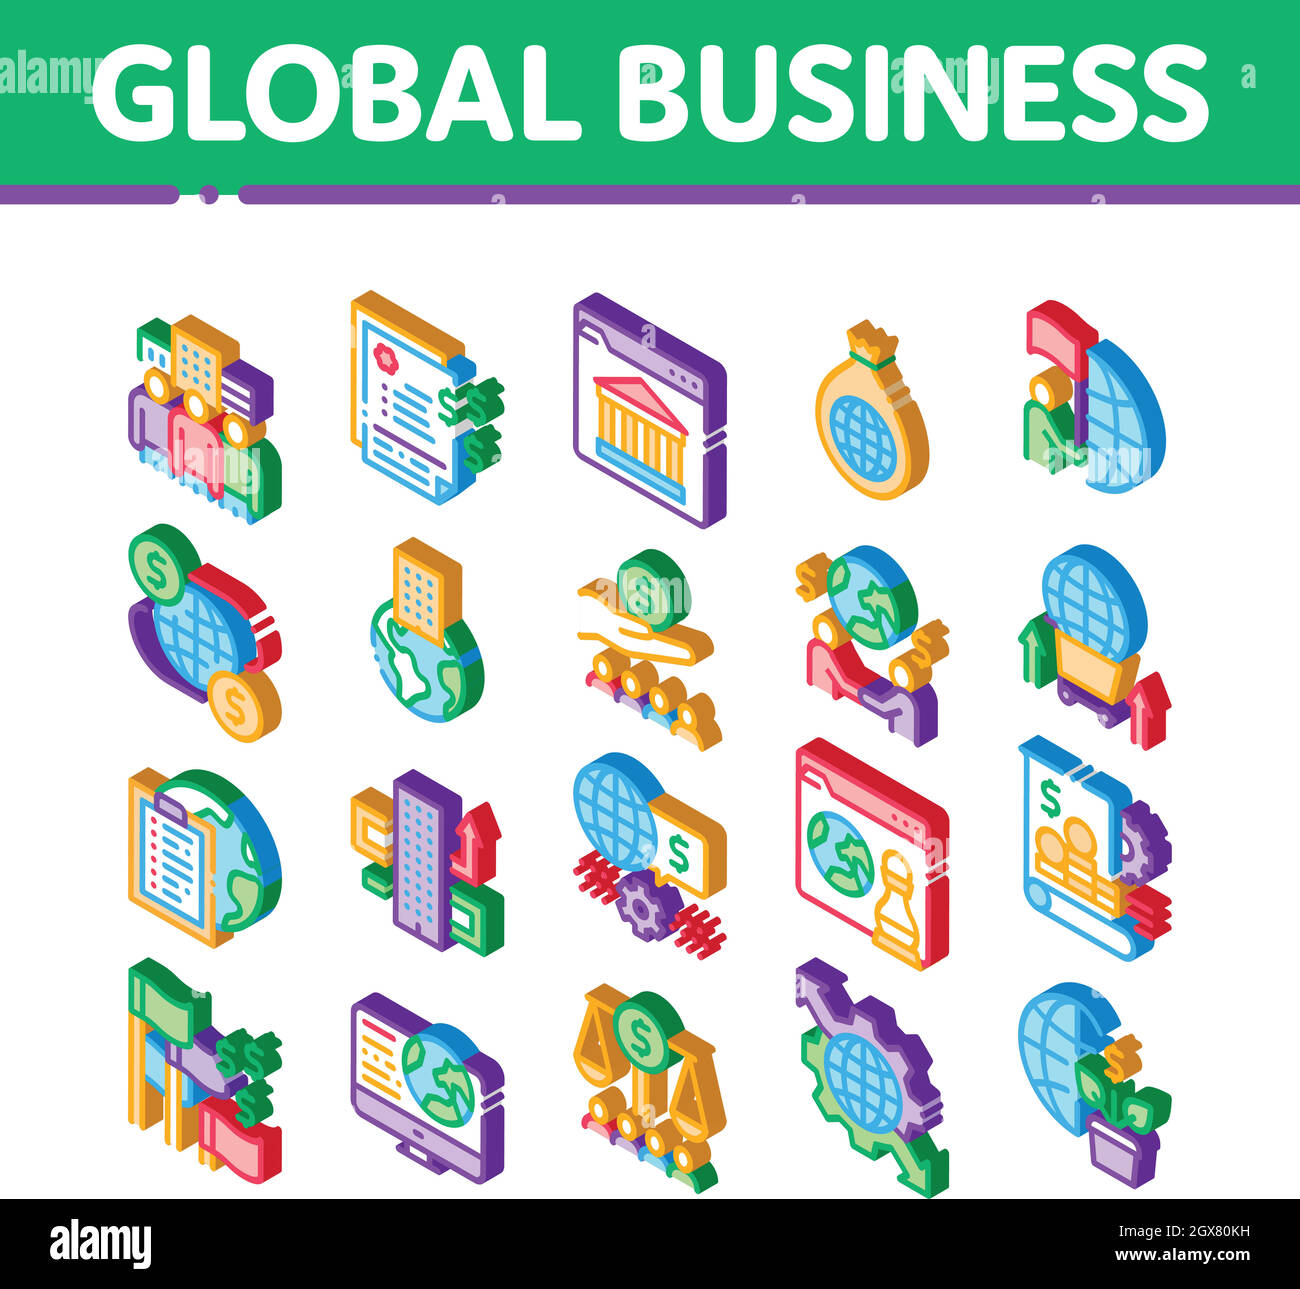 Global Business Finance Strategy Isometric Icons Set Vector Illustrazione Vettoriale